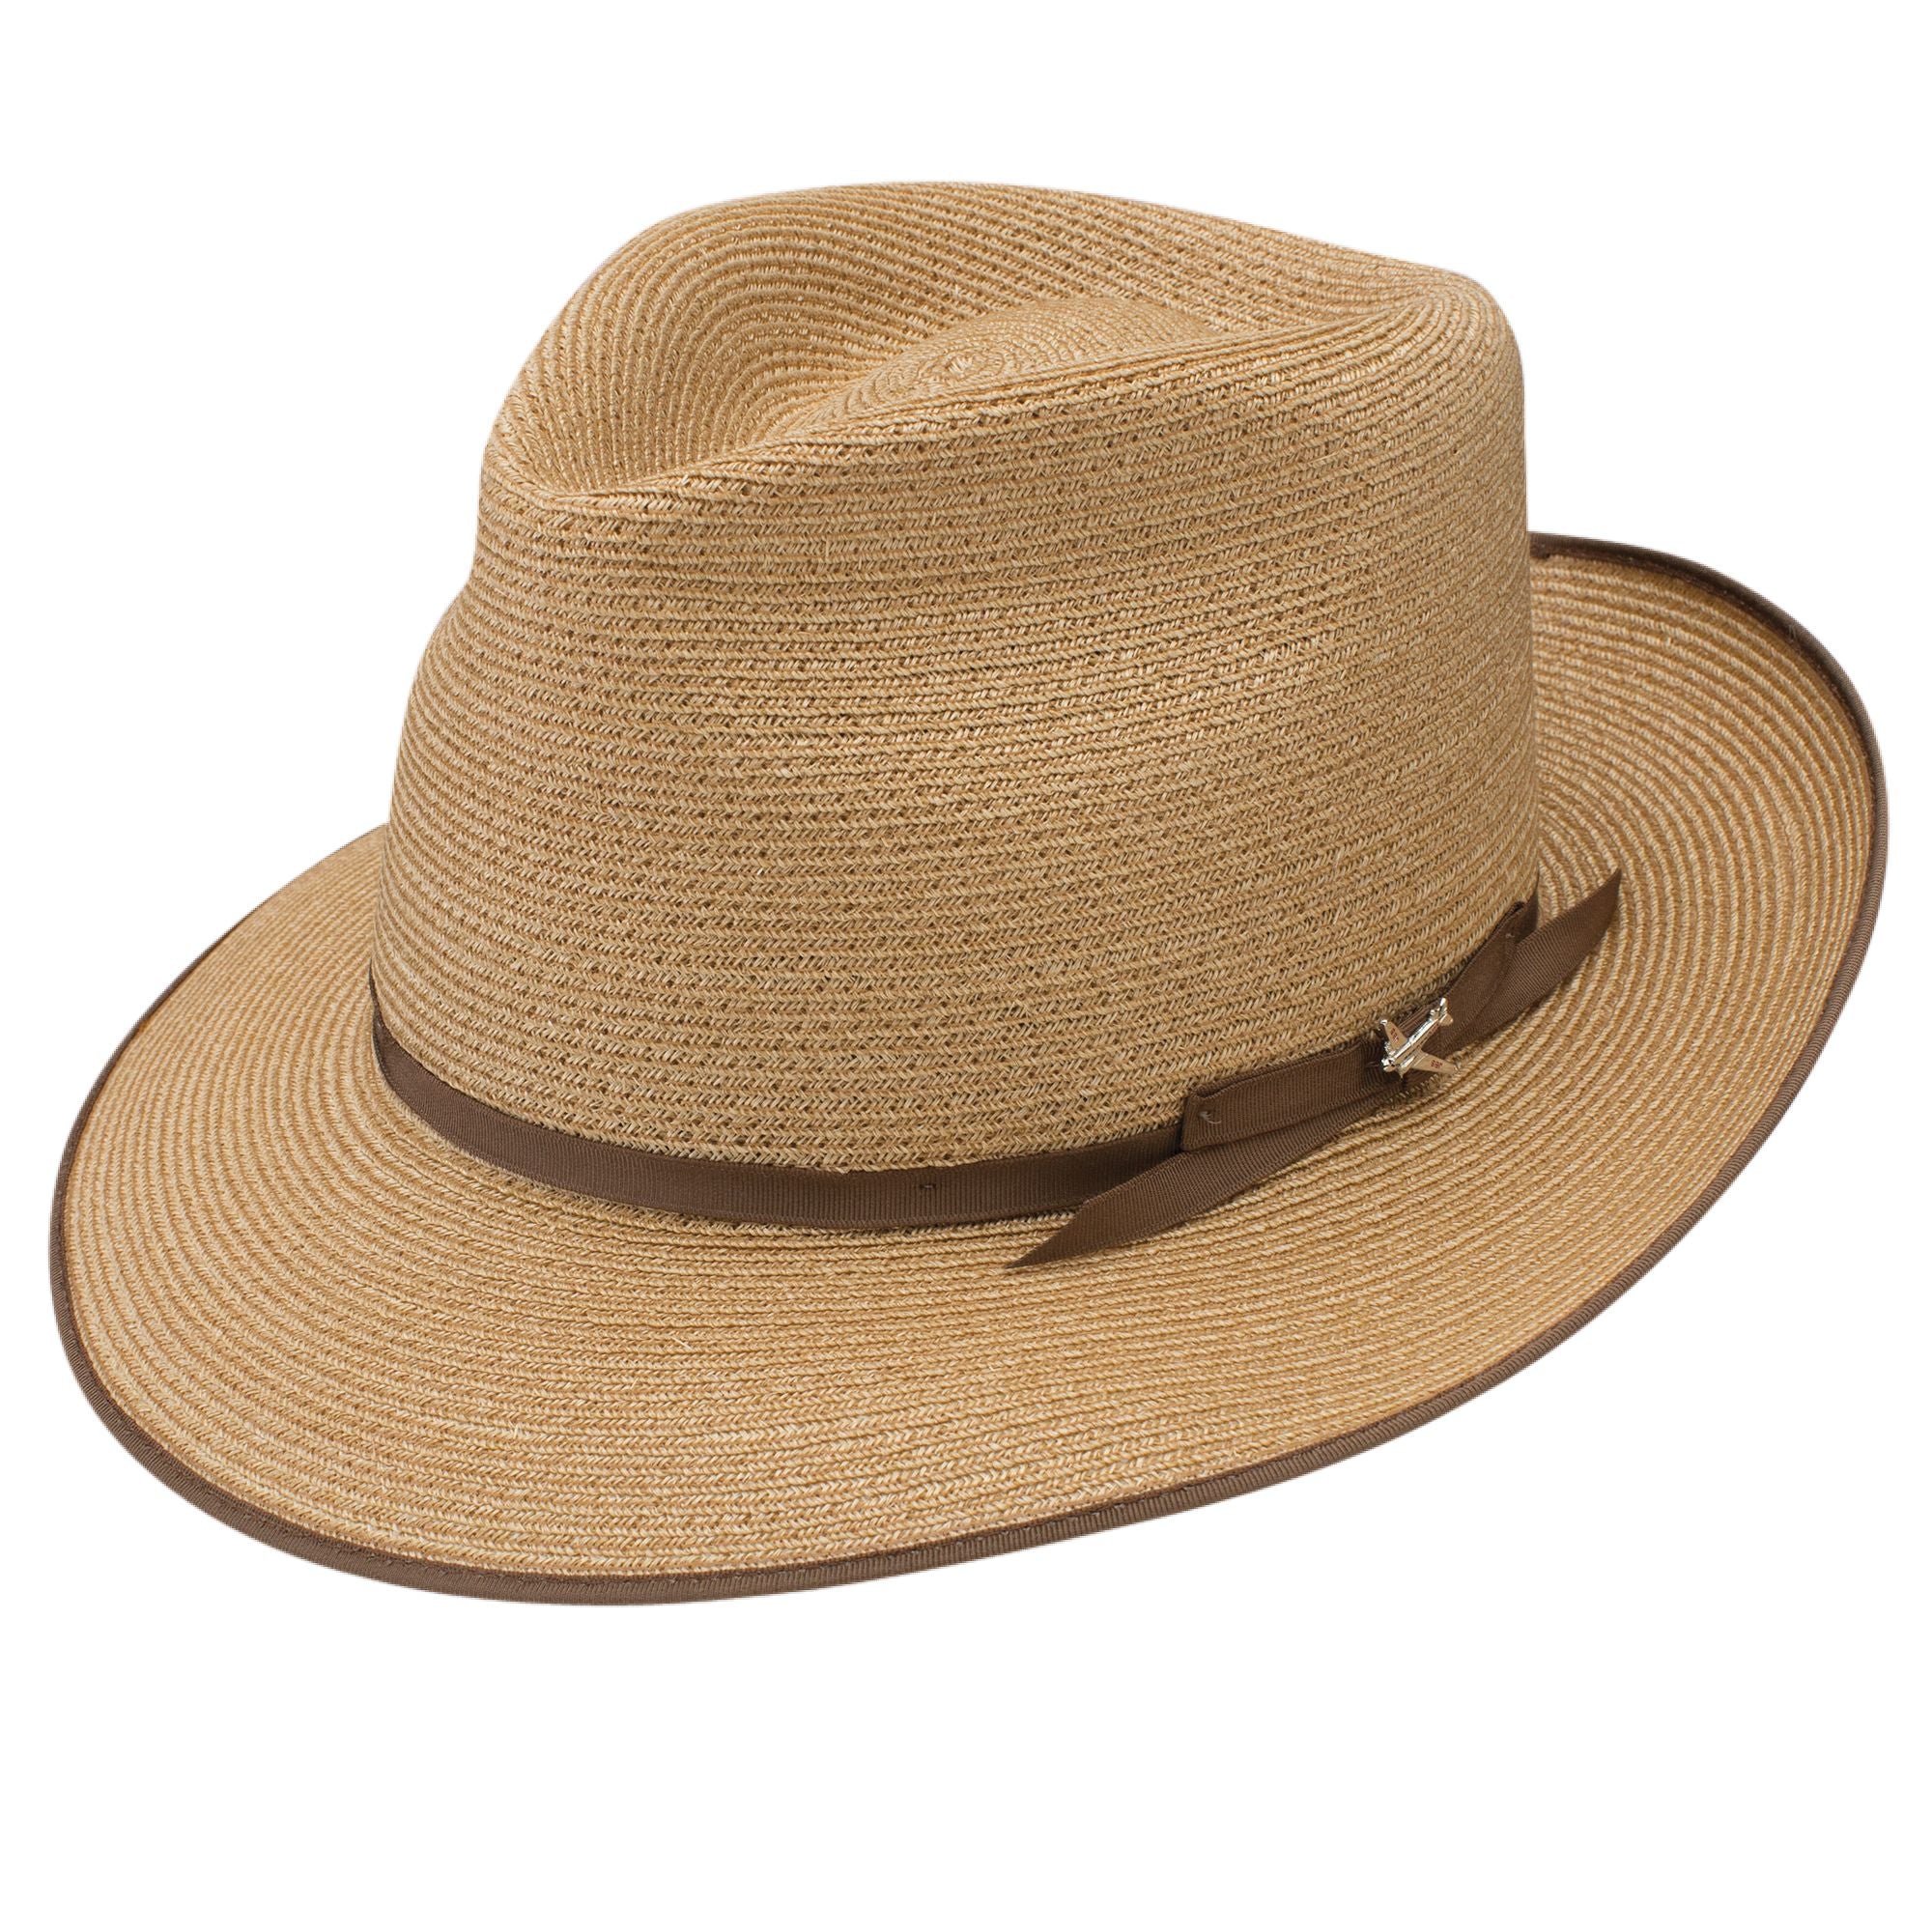 Hemp Straw Stratoliner SE Special Edition by Stetson